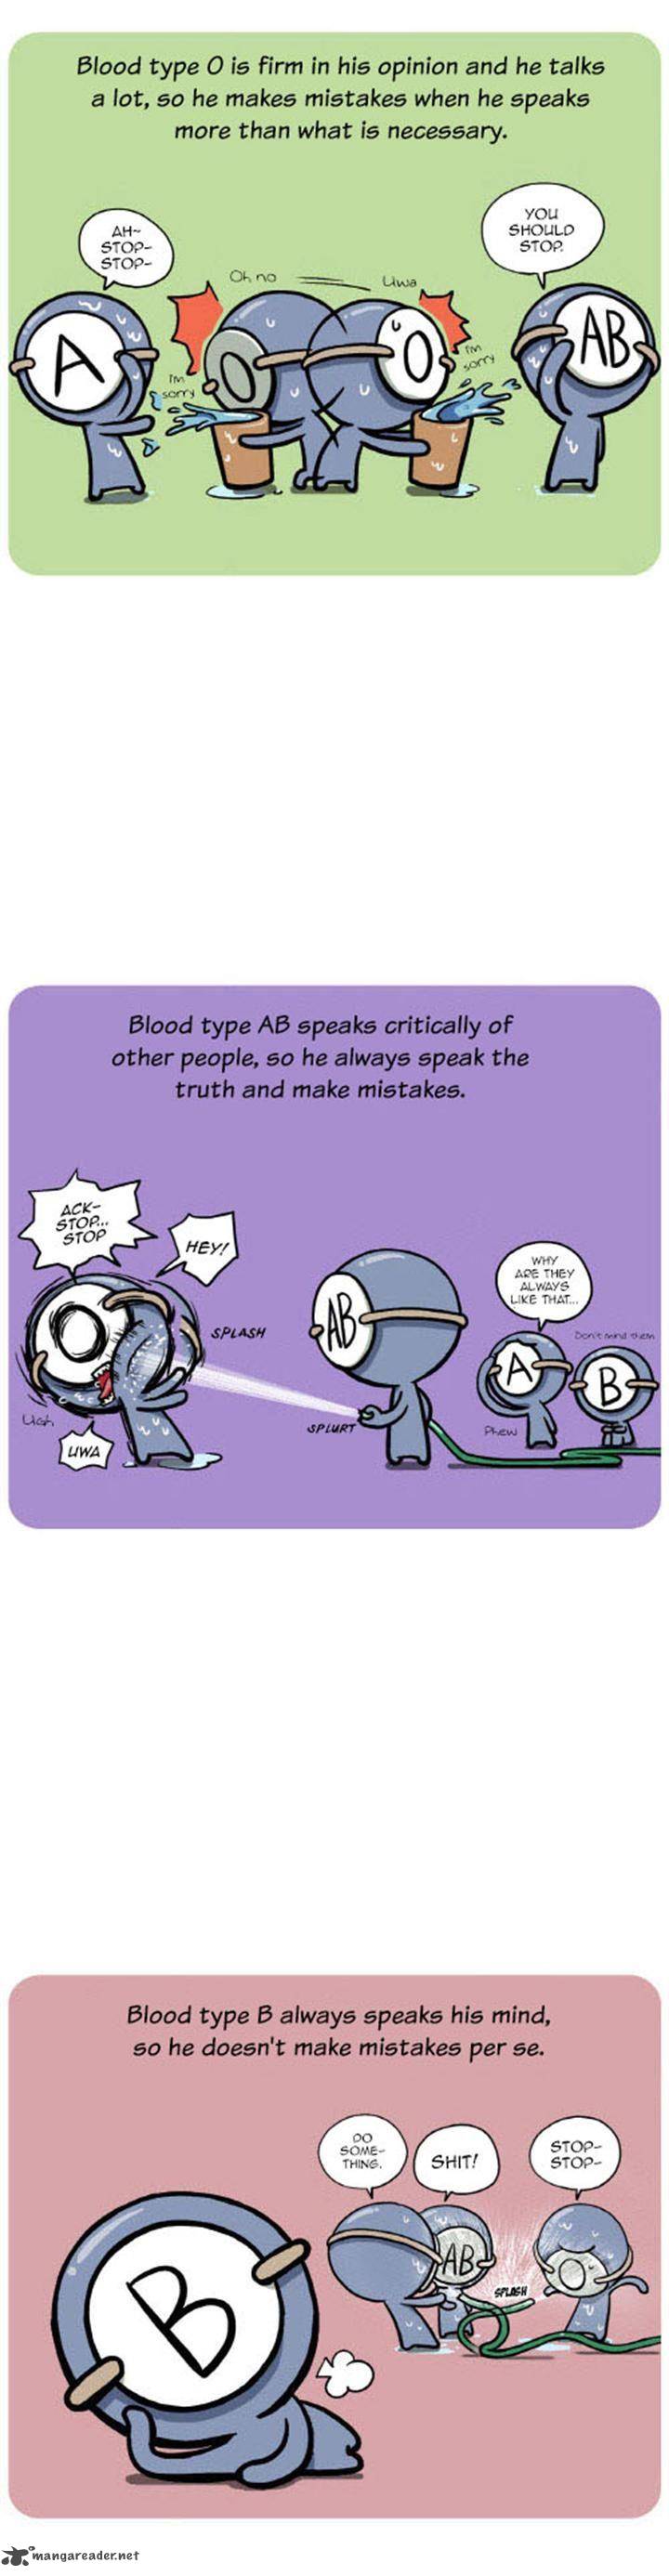 a_simple_thinking_about_blood_types_13_6